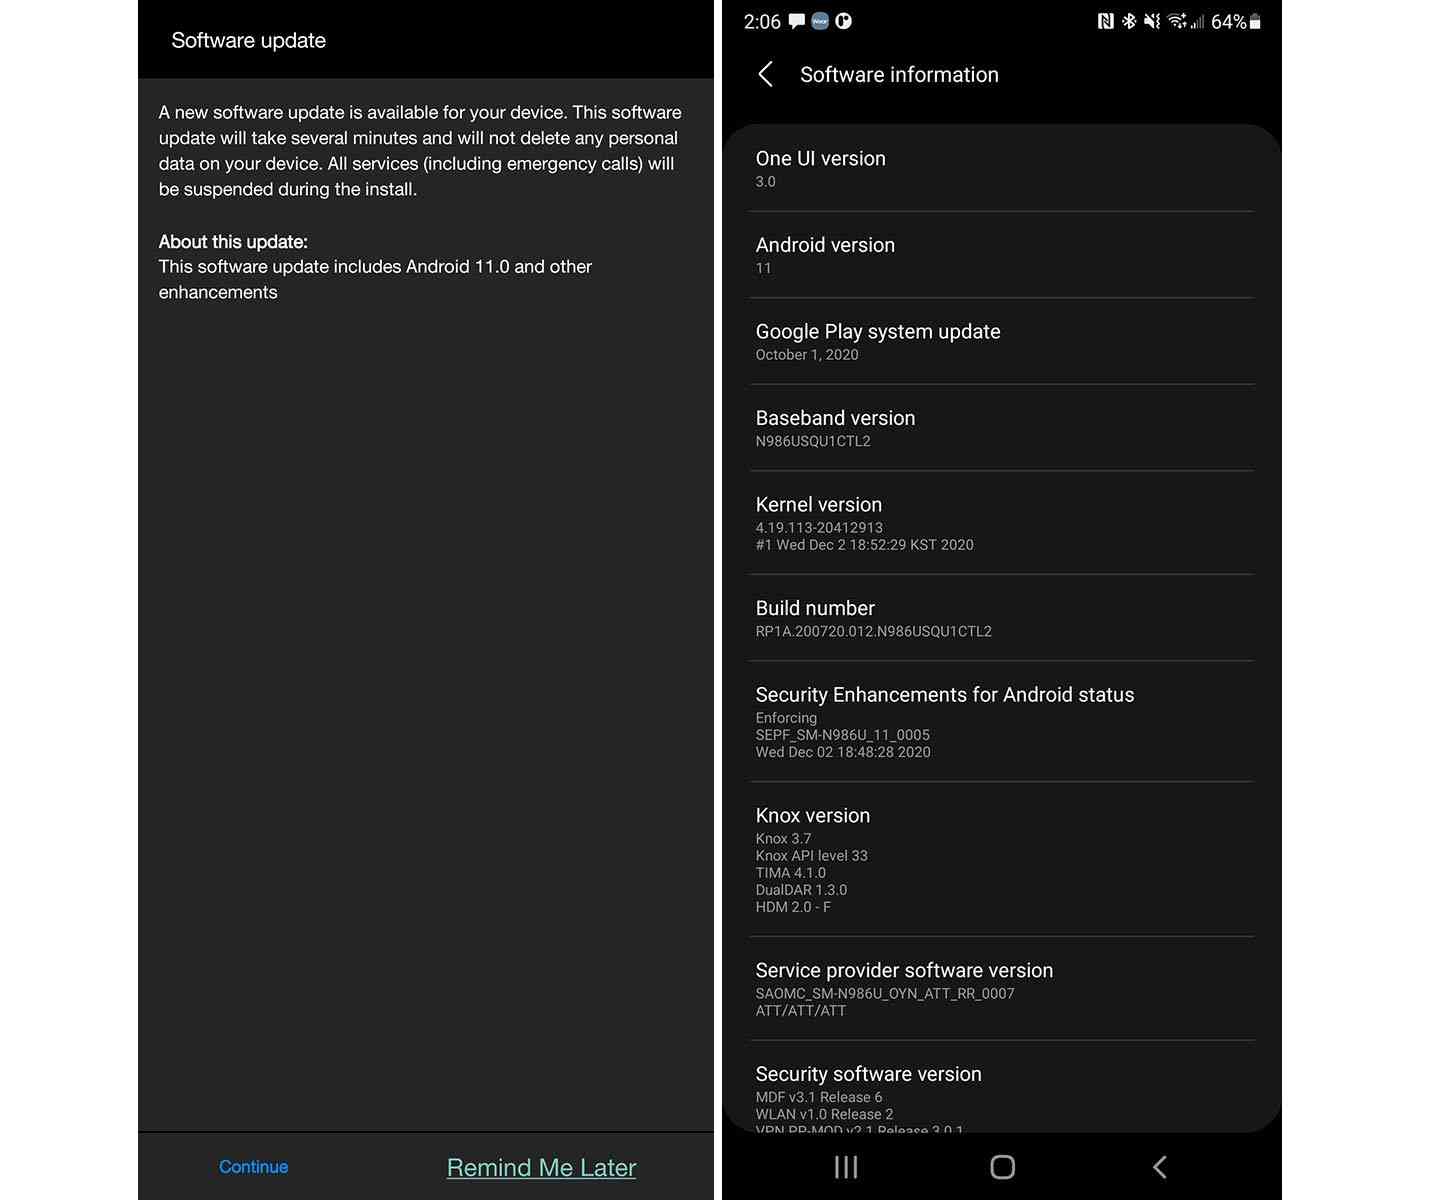 AT&T Galaxy Note 20 Android 11 update